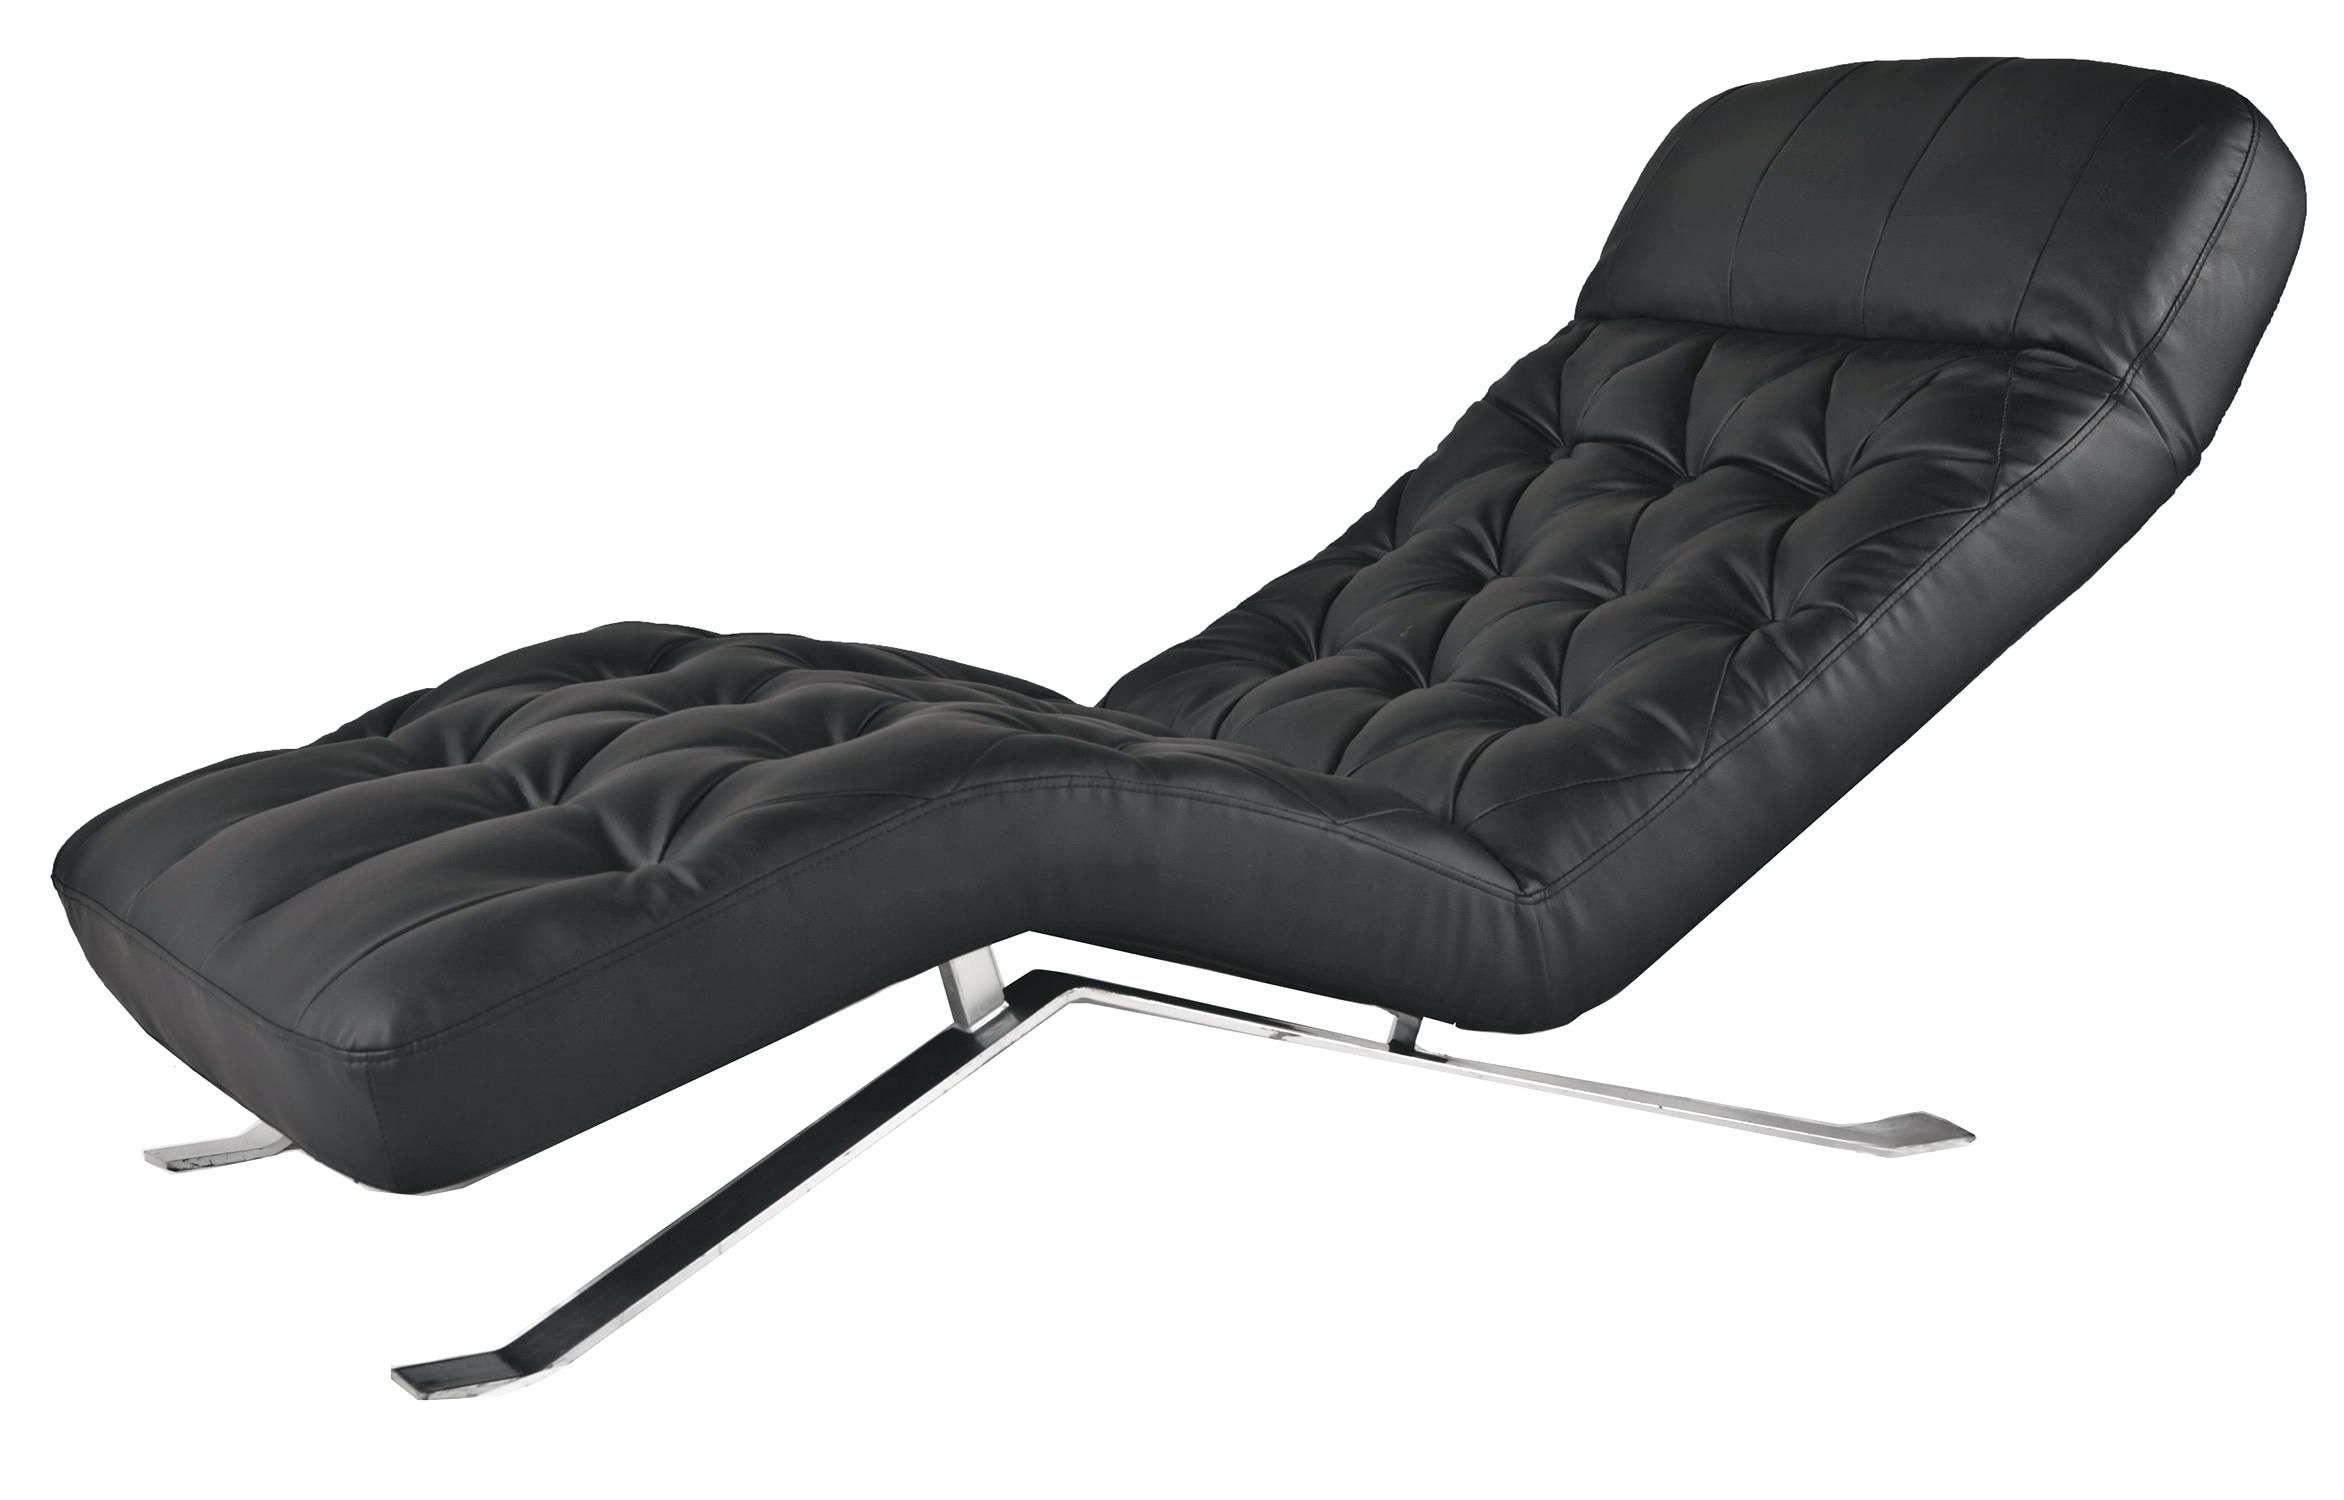 2017 Contemporary Chaise Lounge Chairs Throughout Decoration: Contemporary Chaise Lounge Chair (Photo 5 of 15)